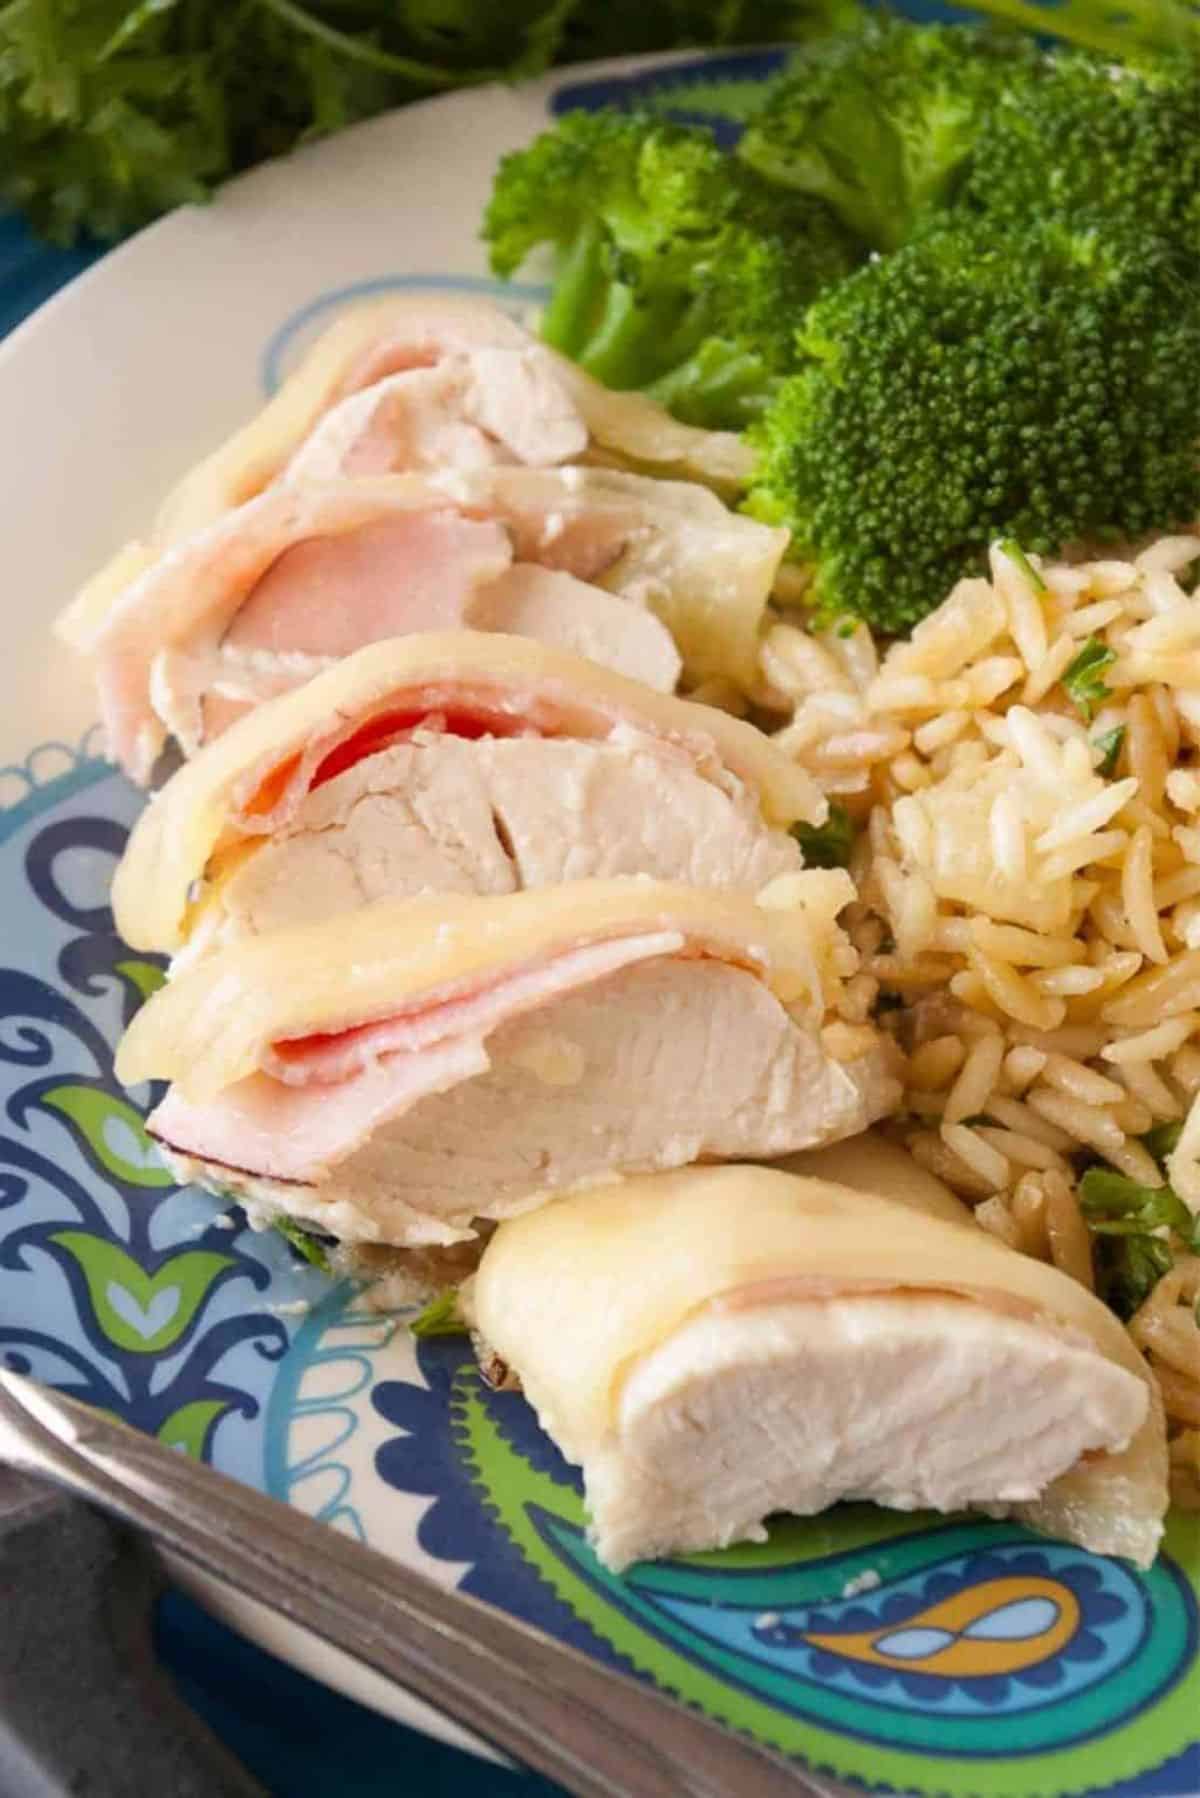 Chicken Cordon Bleu with rice and broccoli on a plate.